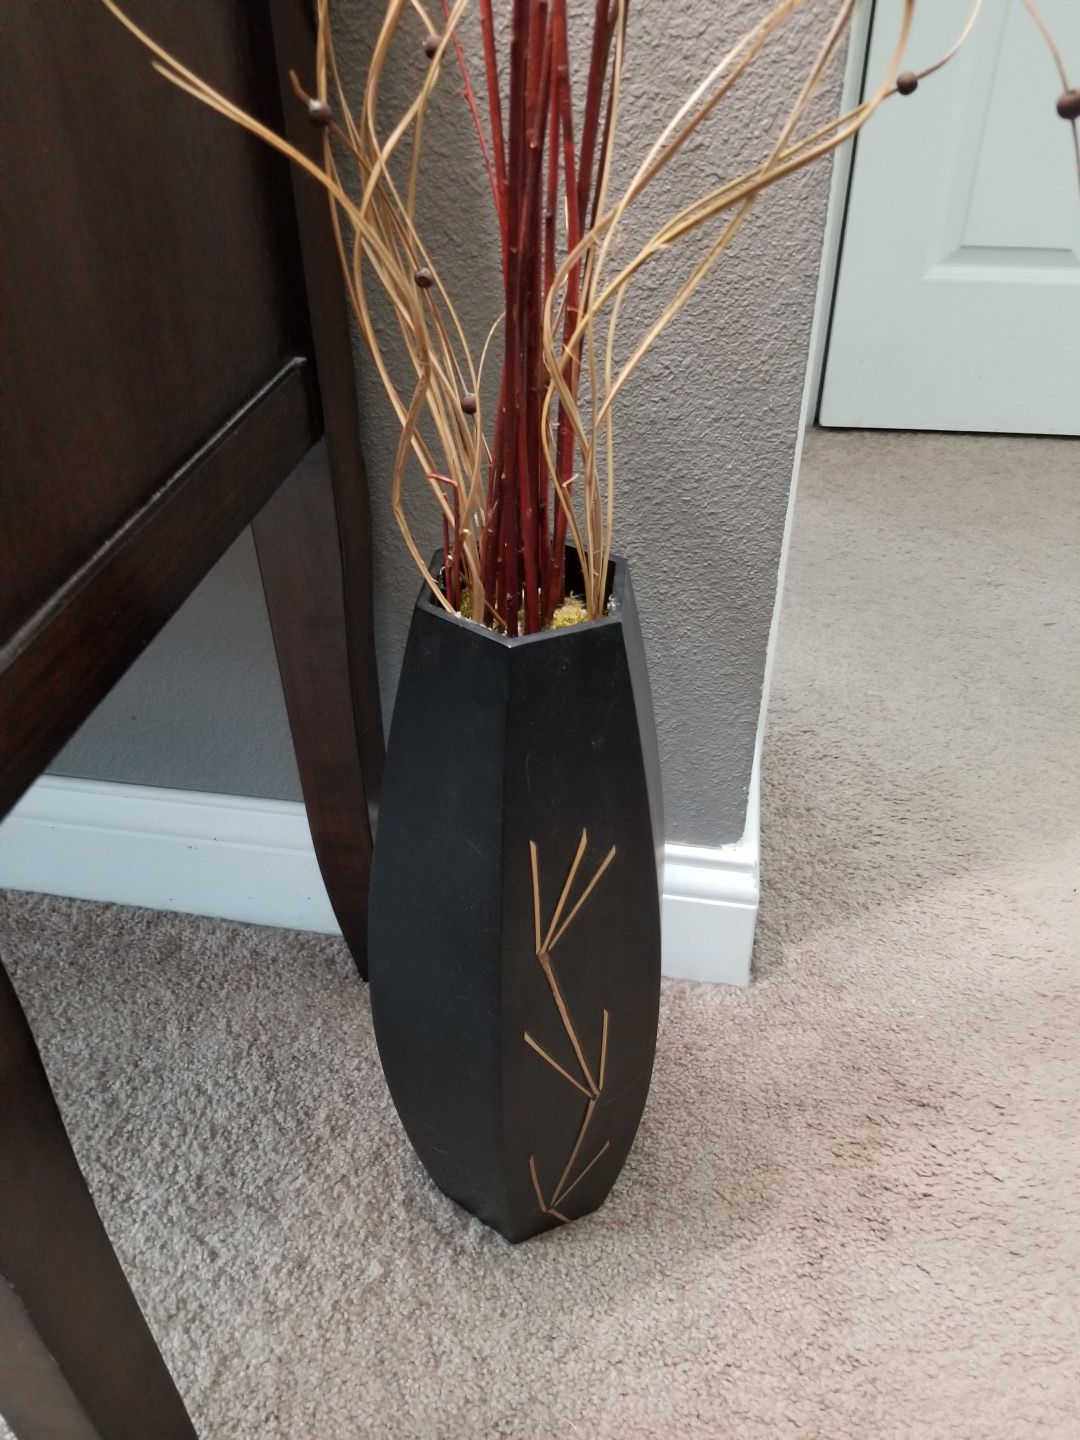 Decorative vase with branches